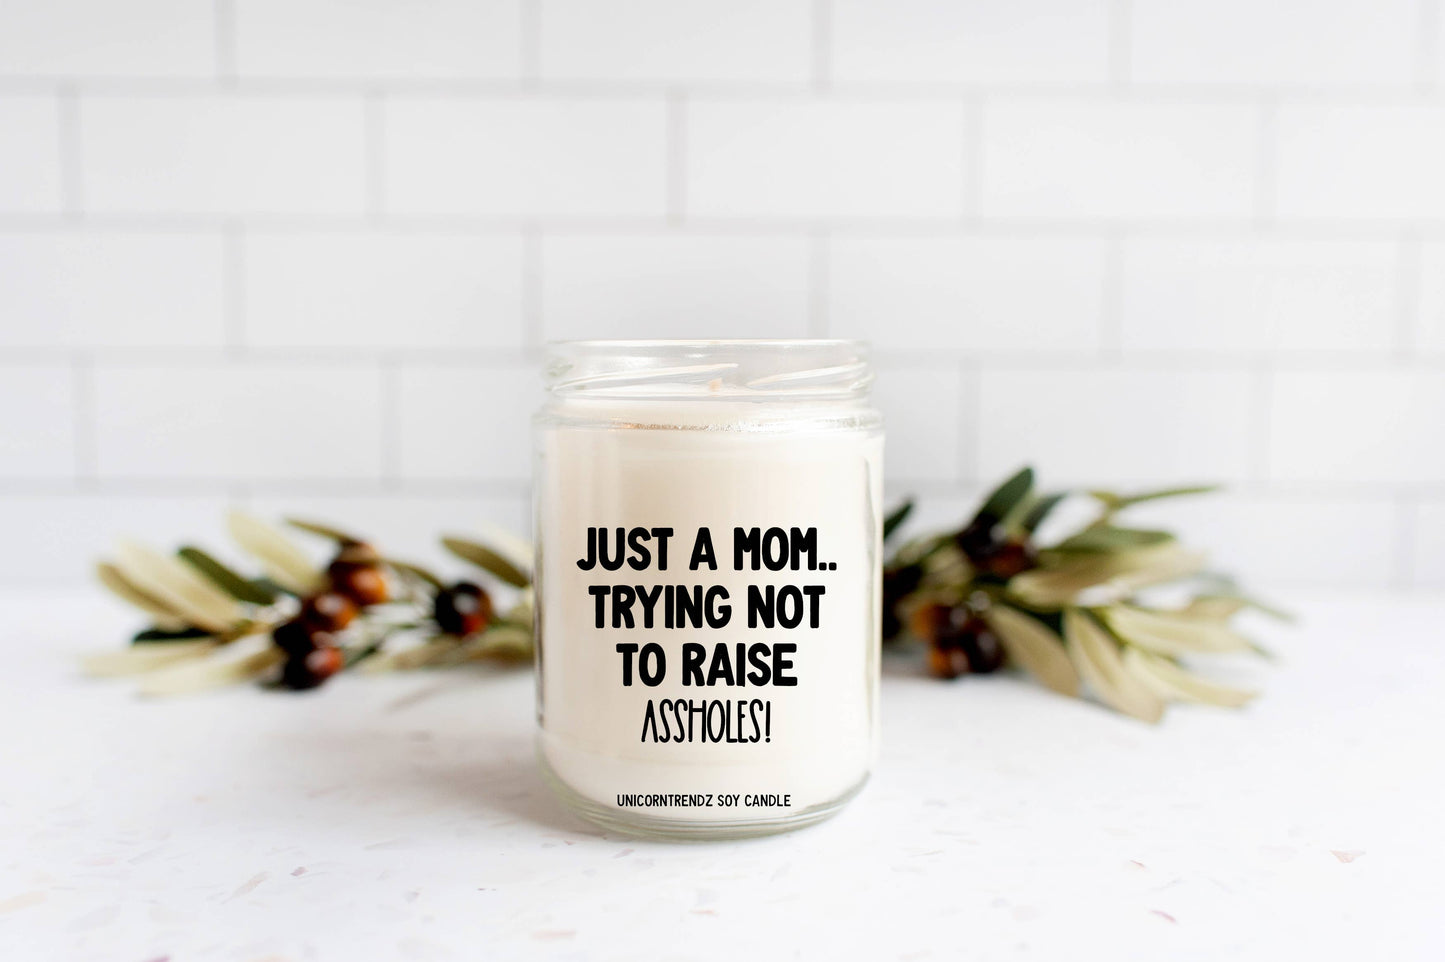 Just a Mom Trying Not To Raise A** Holes Soy Candle